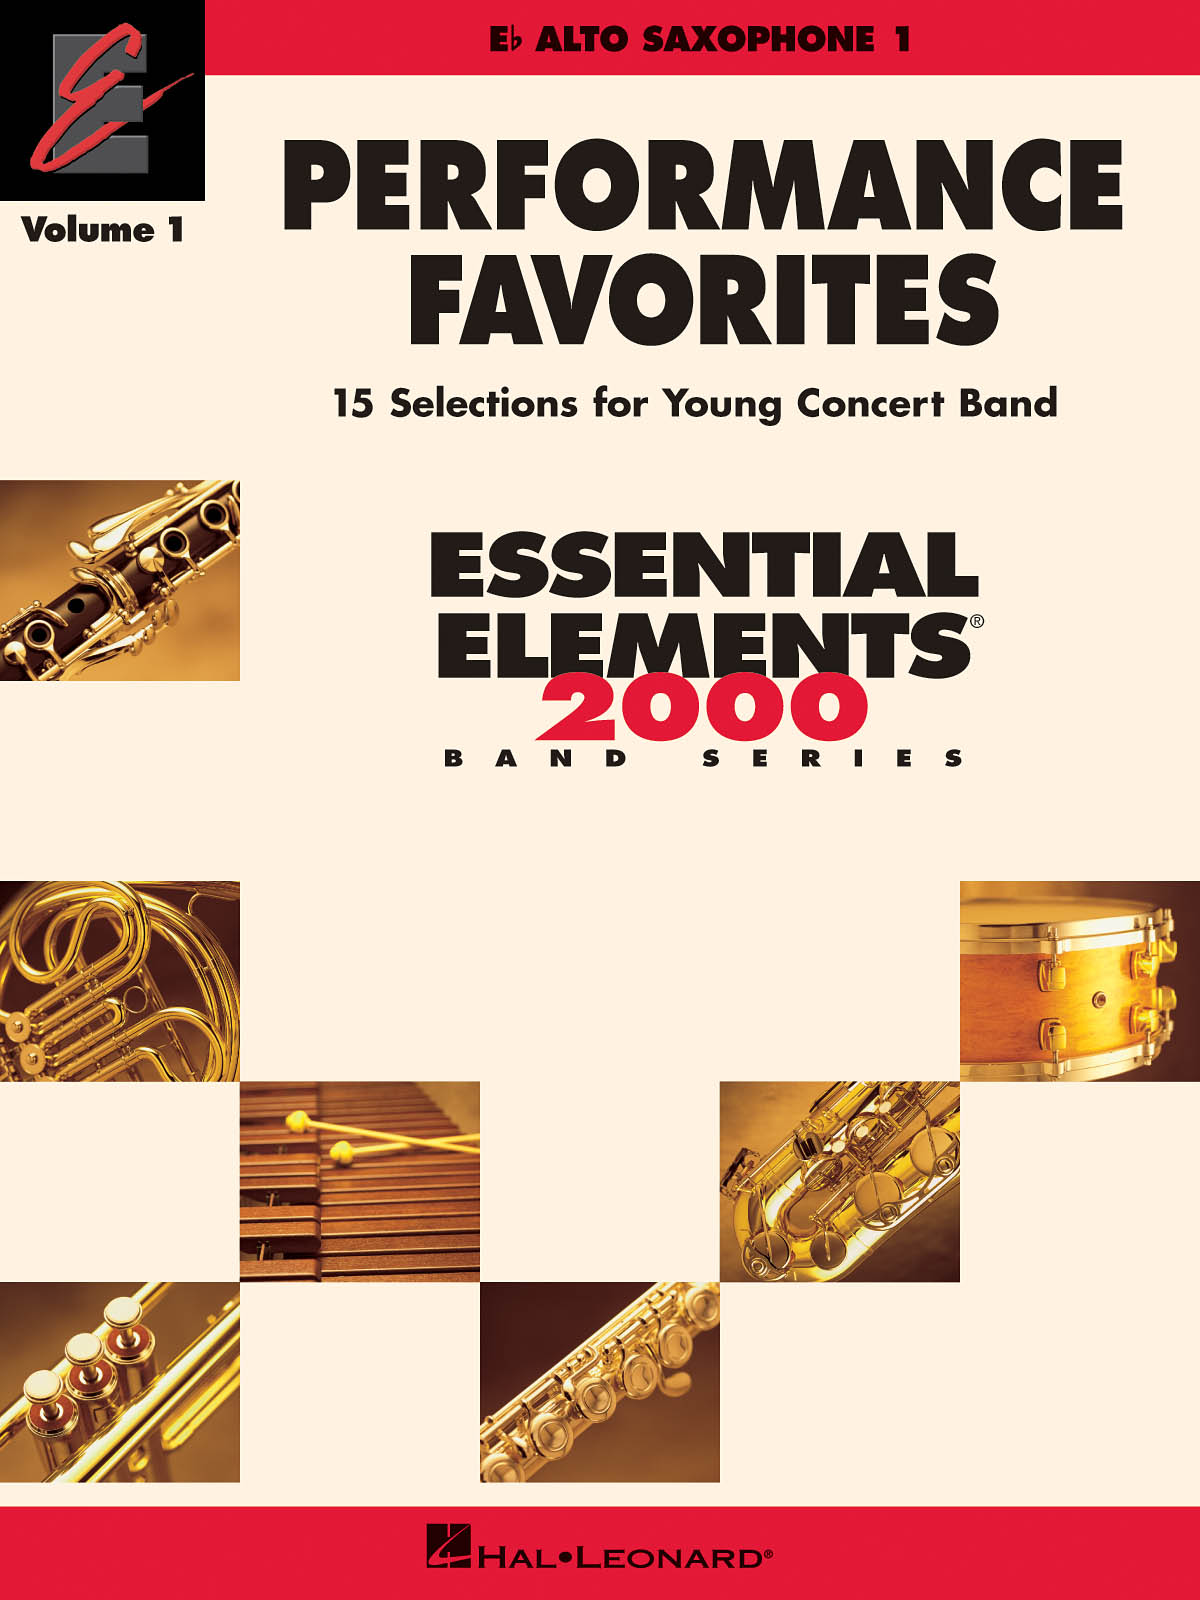 Performance Favorites Vol. 1 - Alto Saxophone 1 - 15 Selections for Young Concert Band - noty na altový saxofon